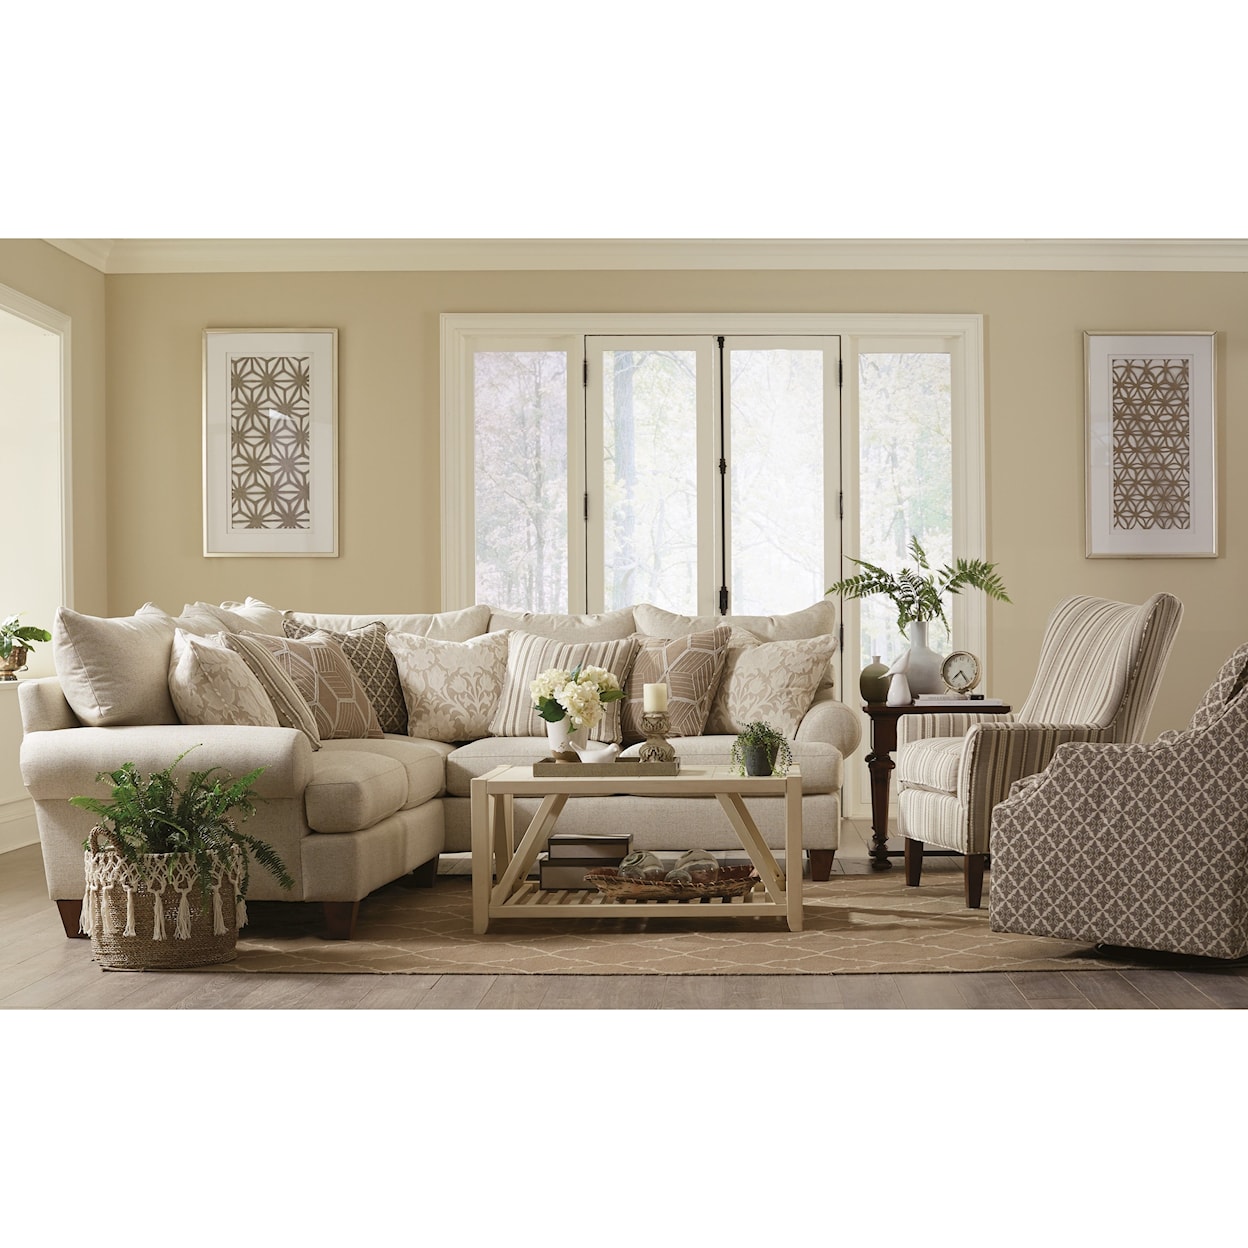 Paula Deen by Craftmaster P781650 4-Seat Sectional Sofa